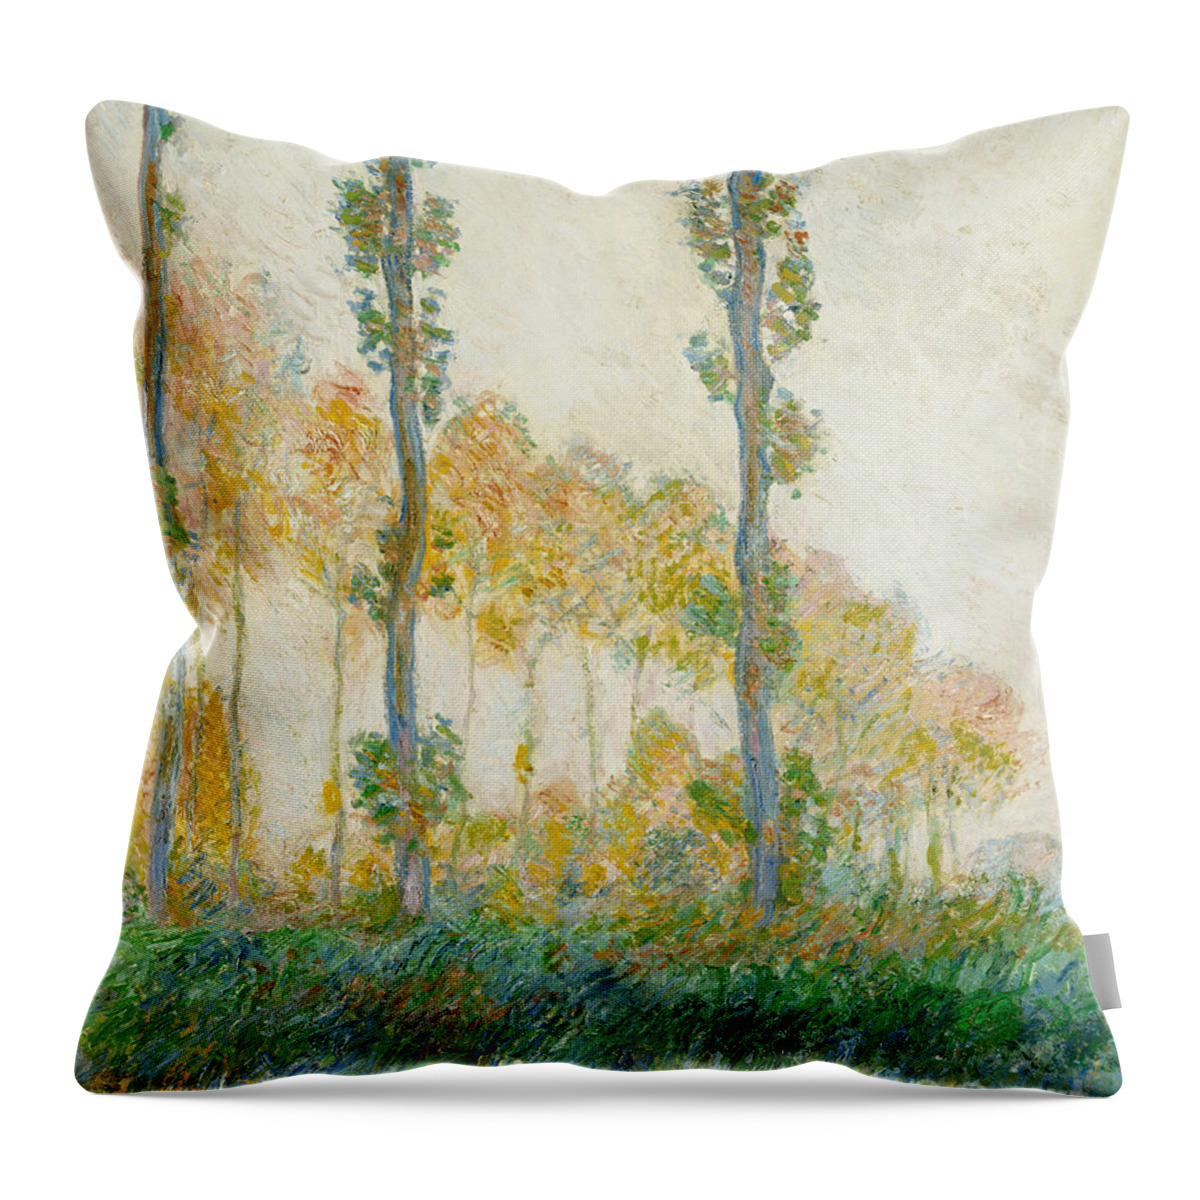 Impressionism; Impressionist; Landscape; River Throw Pillow featuring the painting The Three Trees, Autumn, 1891 C Monet by Claude Monet